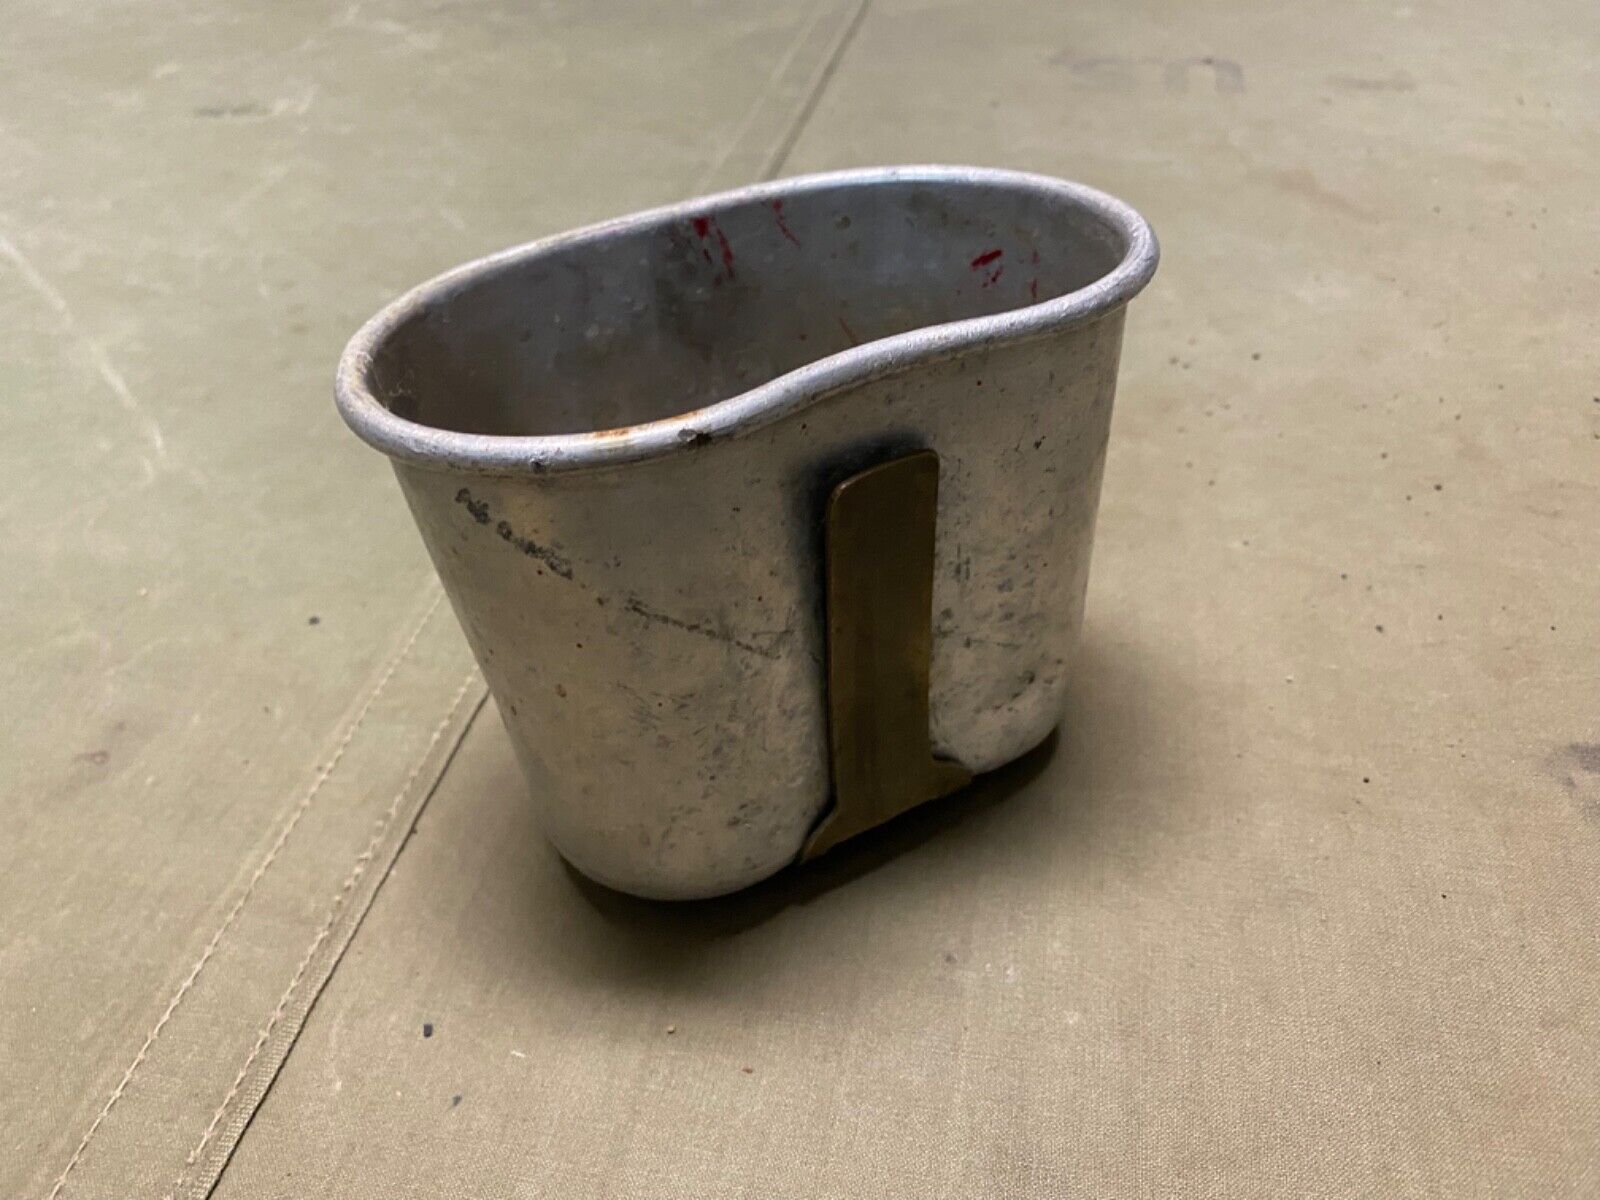 ORIGINAL WWII US ARMY M1942 CANTEEN CUP-DATED 1941, RARE MAKER